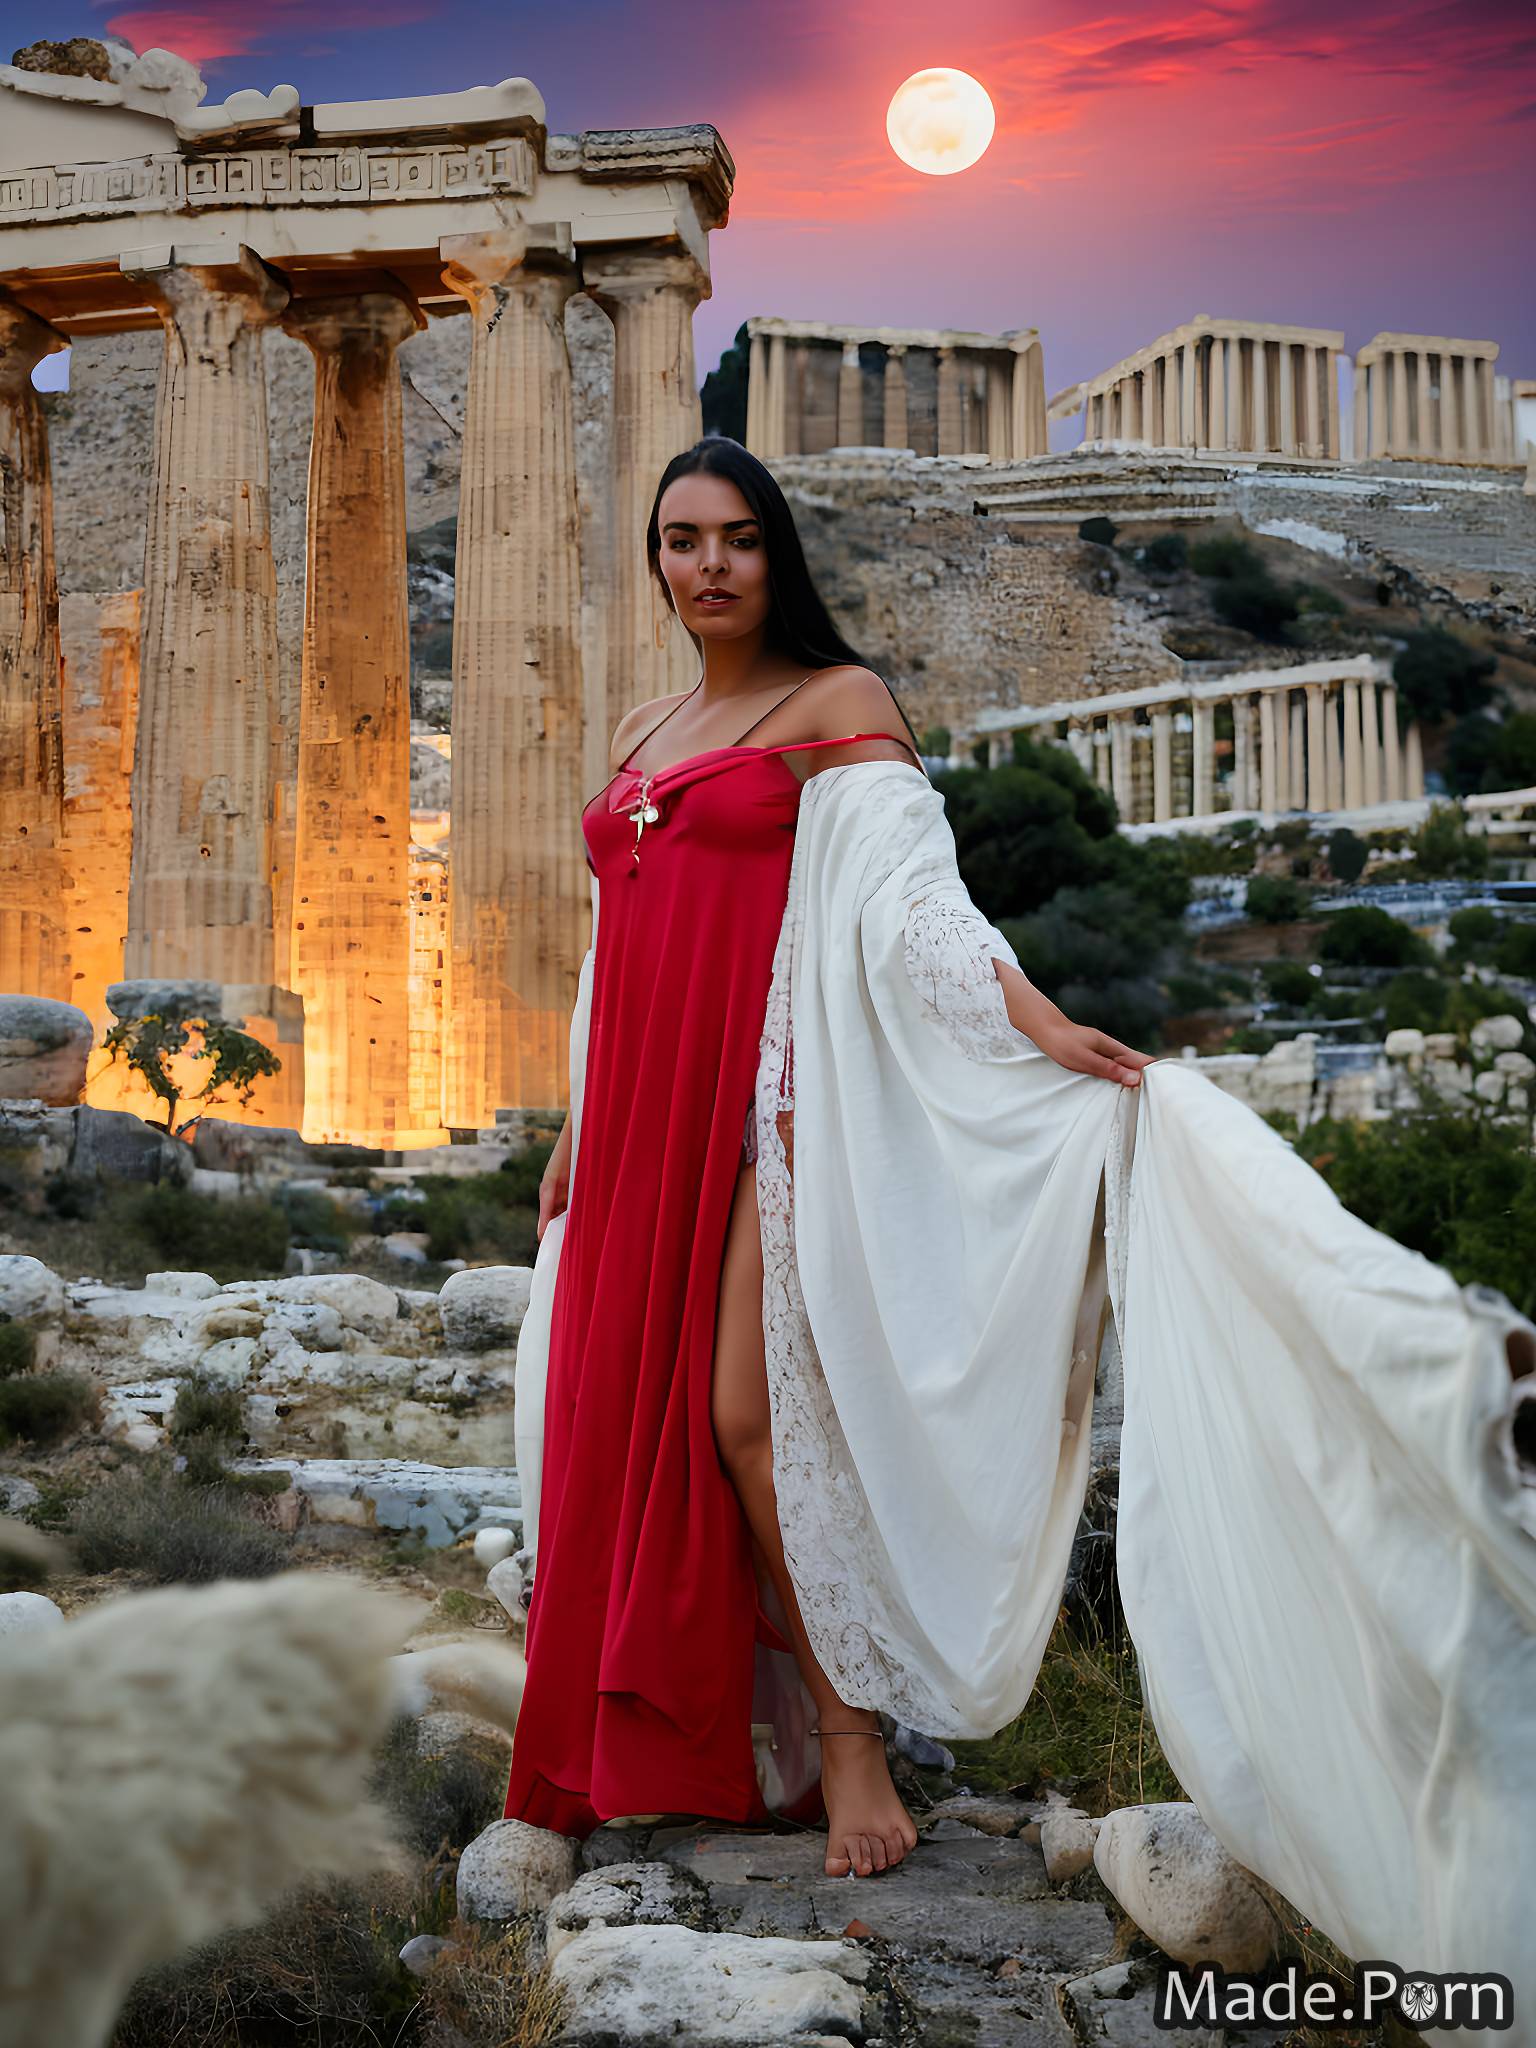 The Acropolis, Athens sunset pussy juice bottomless navy negligee lesbian